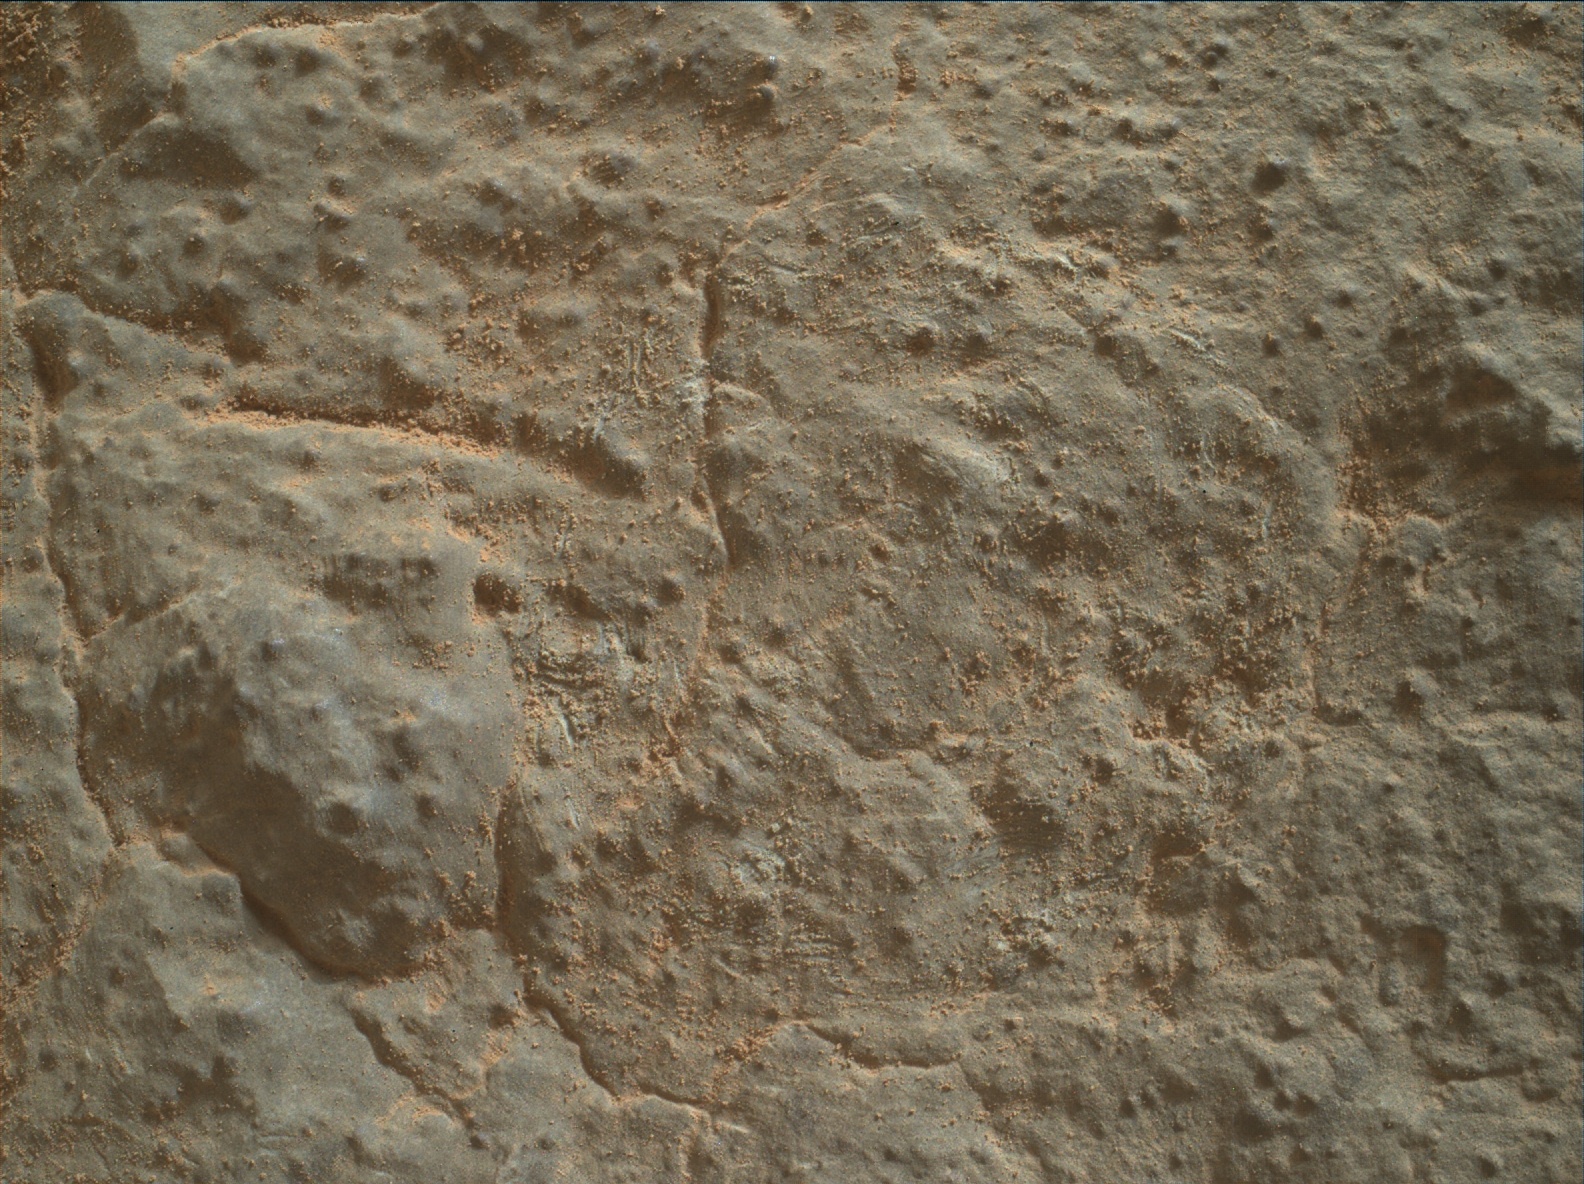 Nasa's Mars rover Curiosity acquired this image using its Mars Hand Lens Imager (MAHLI) on Sol 3454